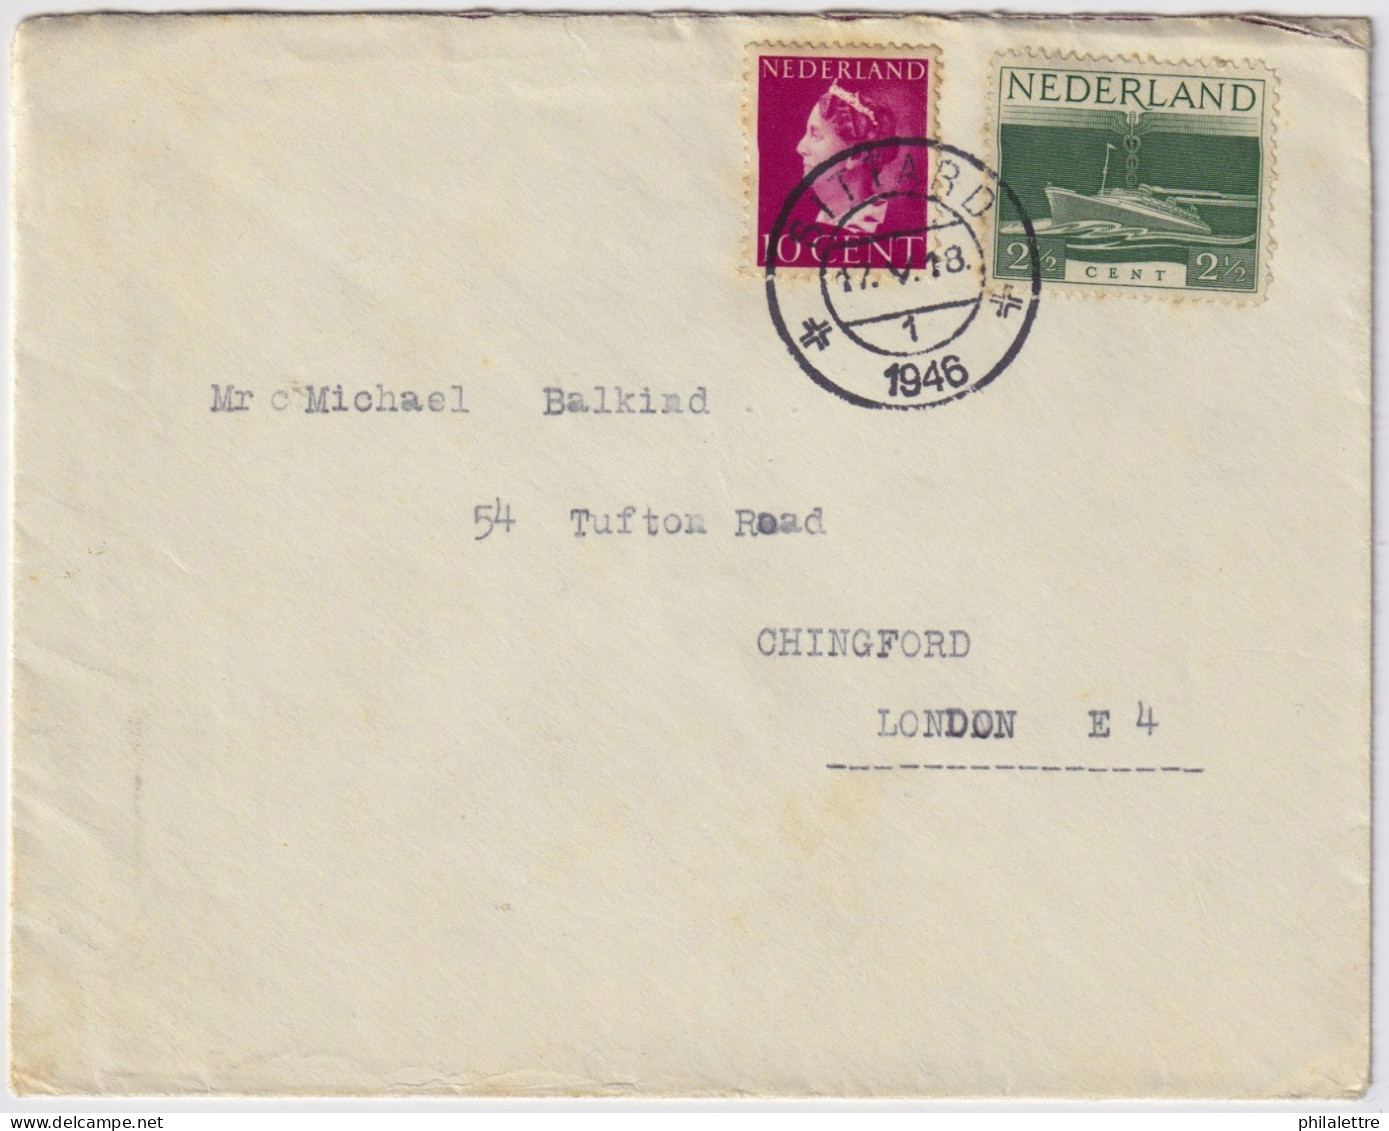 PAYS-BAS / THE NETHERLANDS - 1946 Mi.343 & Mi.429 On Cover From SITTARD To LONDON, England - Storia Postale